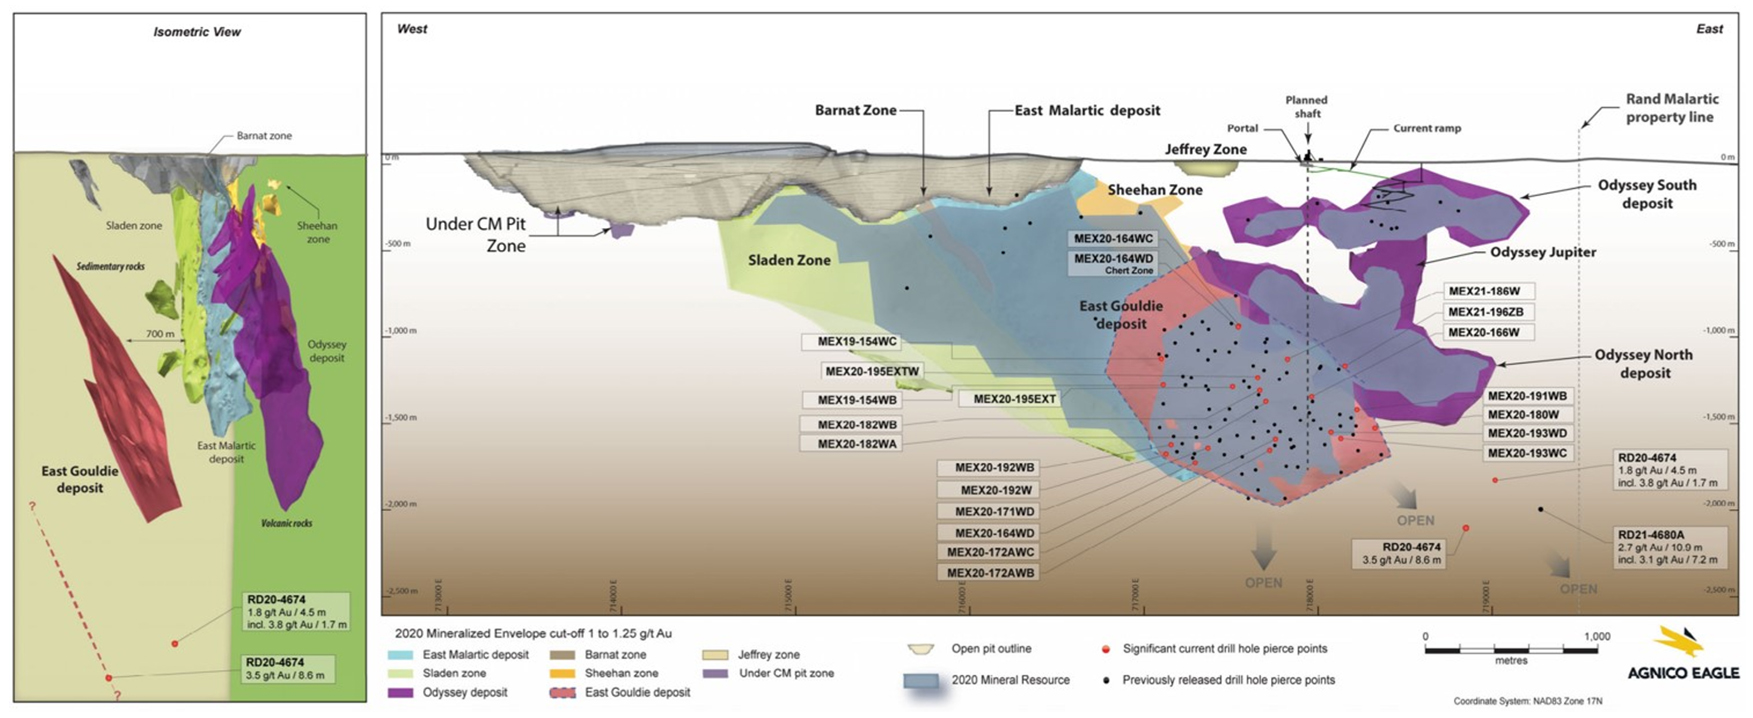 Figure 1. Composites long section from Agnico Eagle’s July 8th, 2021 press release showing exploration highlights on the East Gouldie deposit and new 